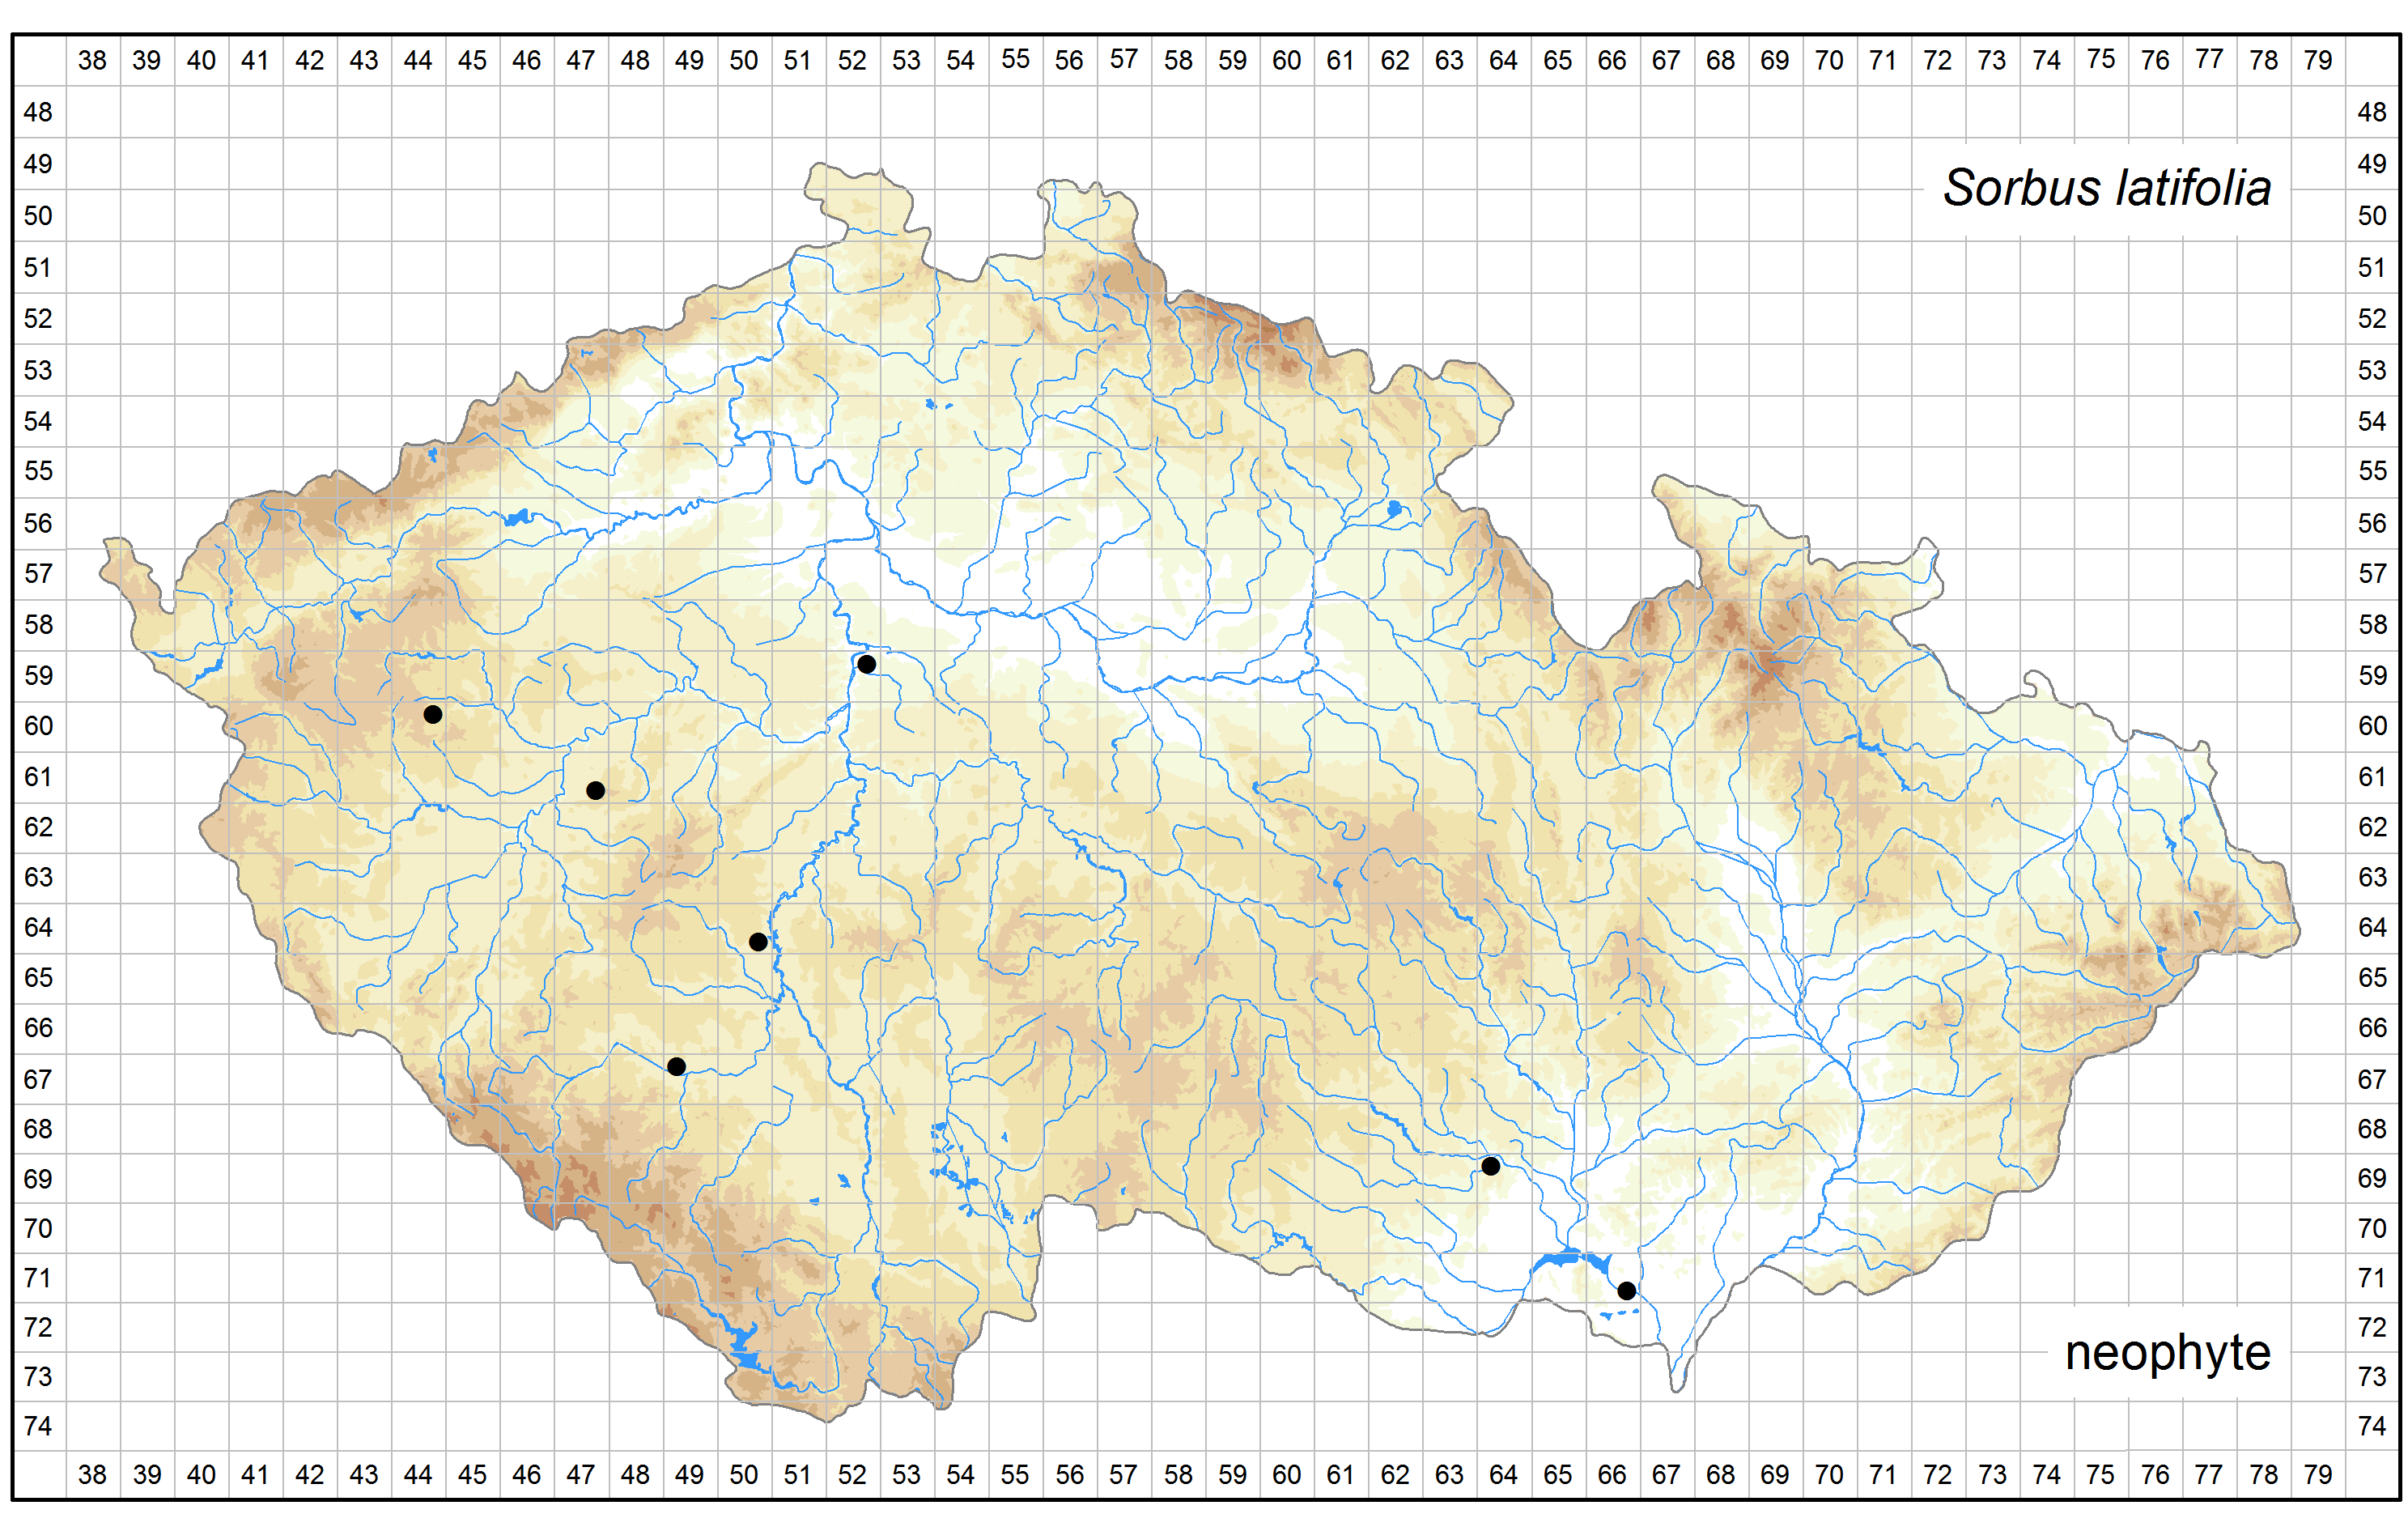 Distribution of Sorbus latifolia in the Czech Republic Author of the map: Martin Lepší, Petr Lepší Map produced on: 11-11-2016 Database records used for producing the distribution map of Sorbus